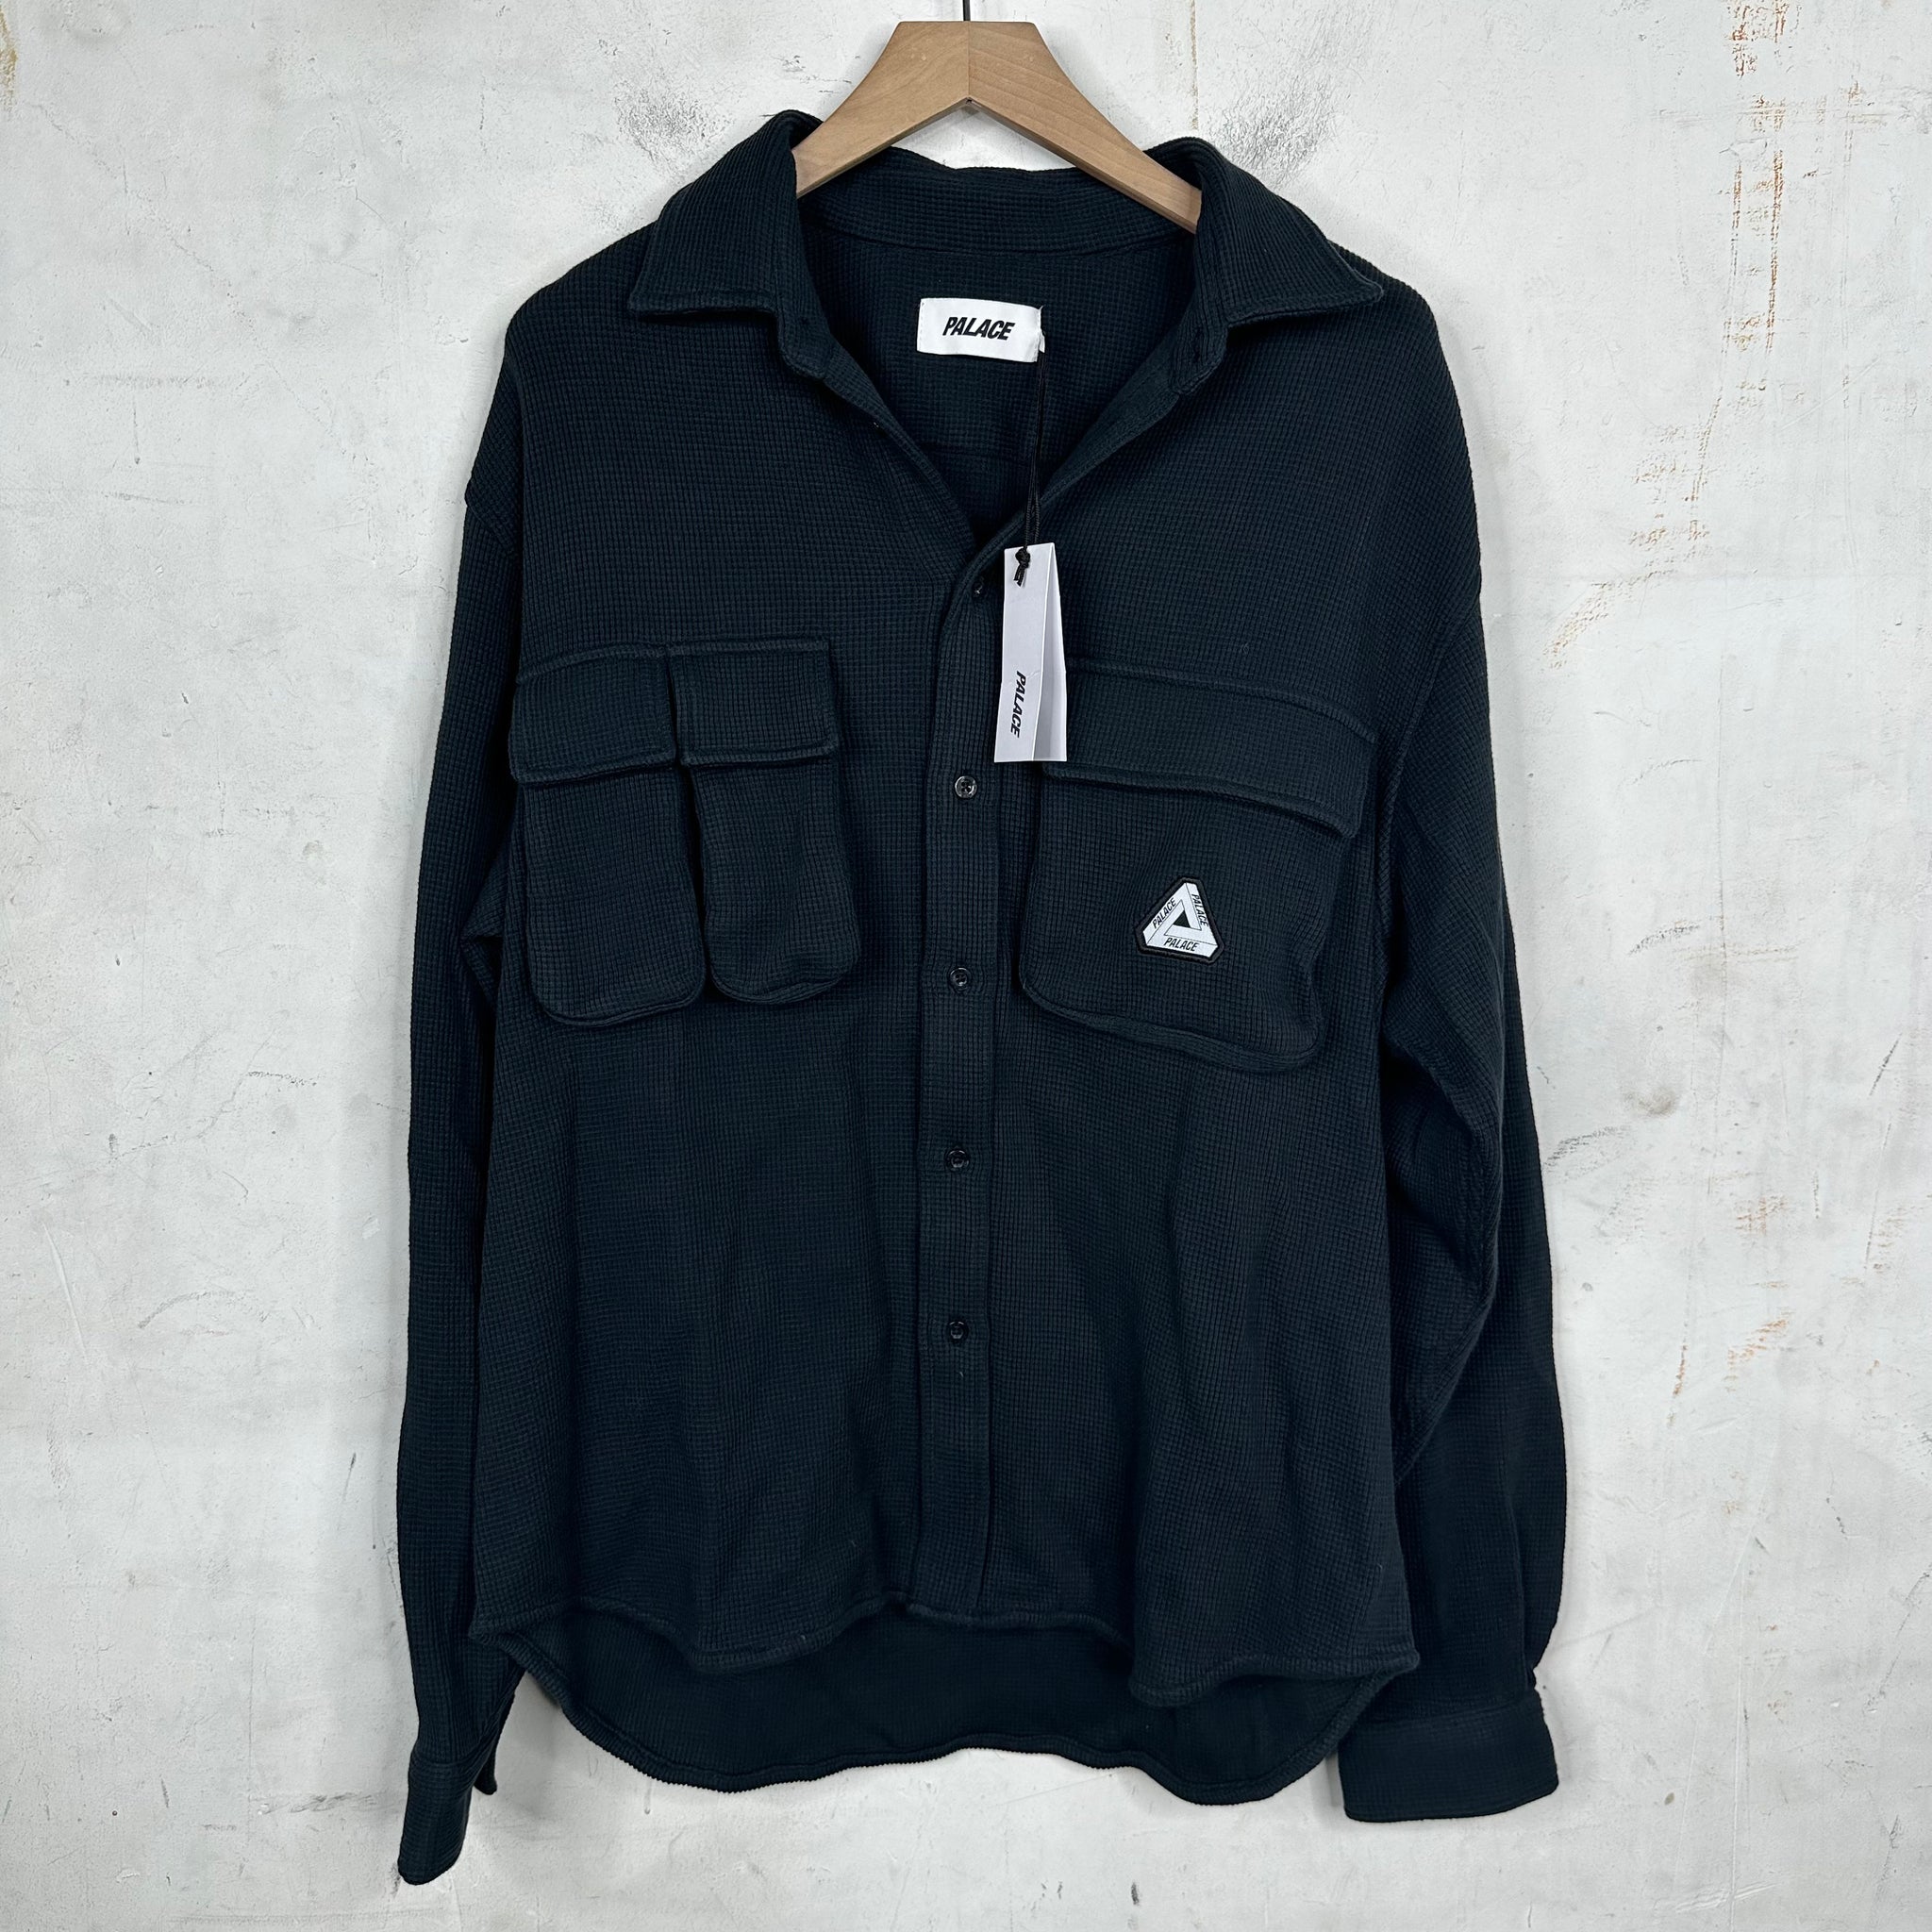 Palace 3D Pocket Thermal Button Up